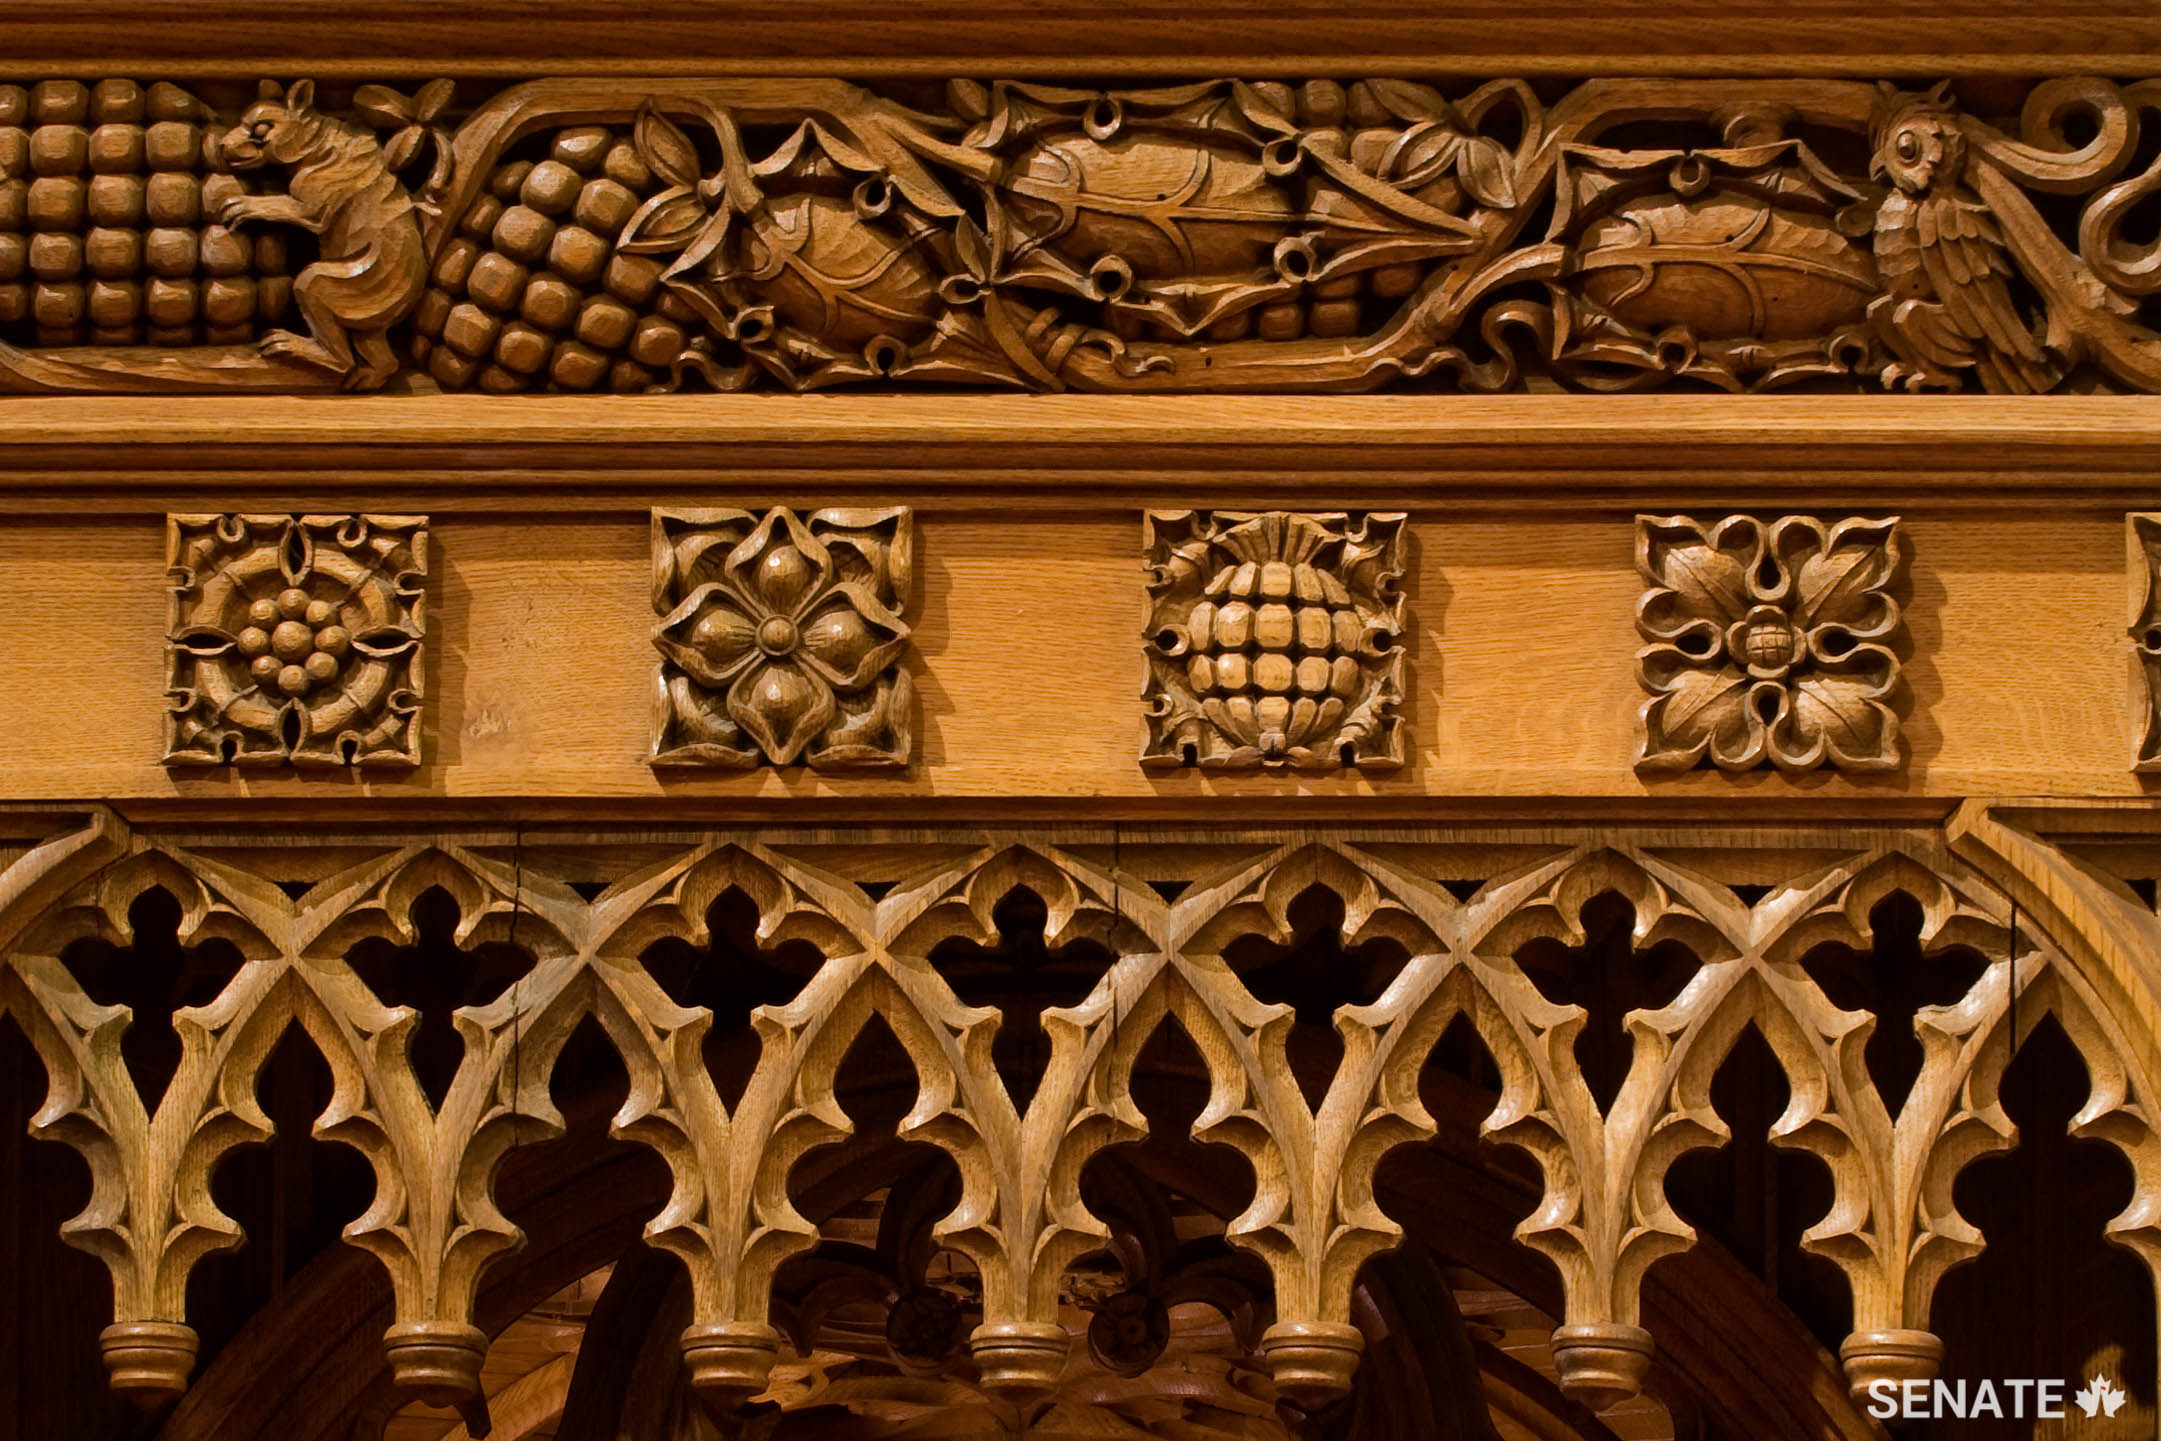 Squirrels, rabbits and jays, representing industry and incessant energy, cavort in the chamber’s intricate oak wainscoting, carved in the 1920s.